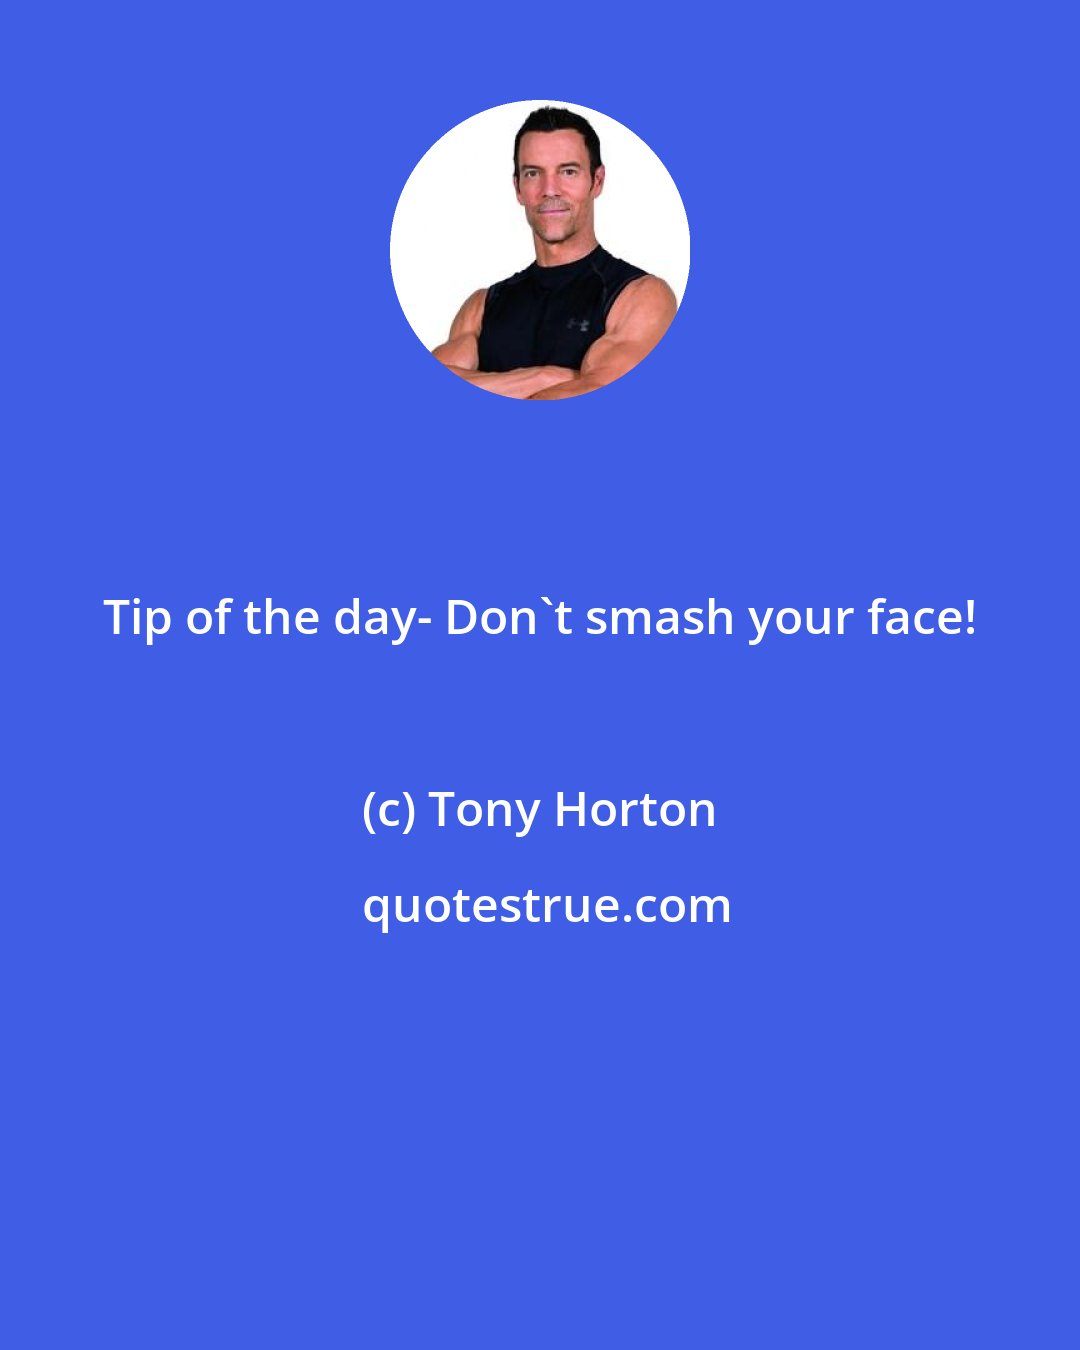 Tony Horton: Tip of the day- Don't smash your face!